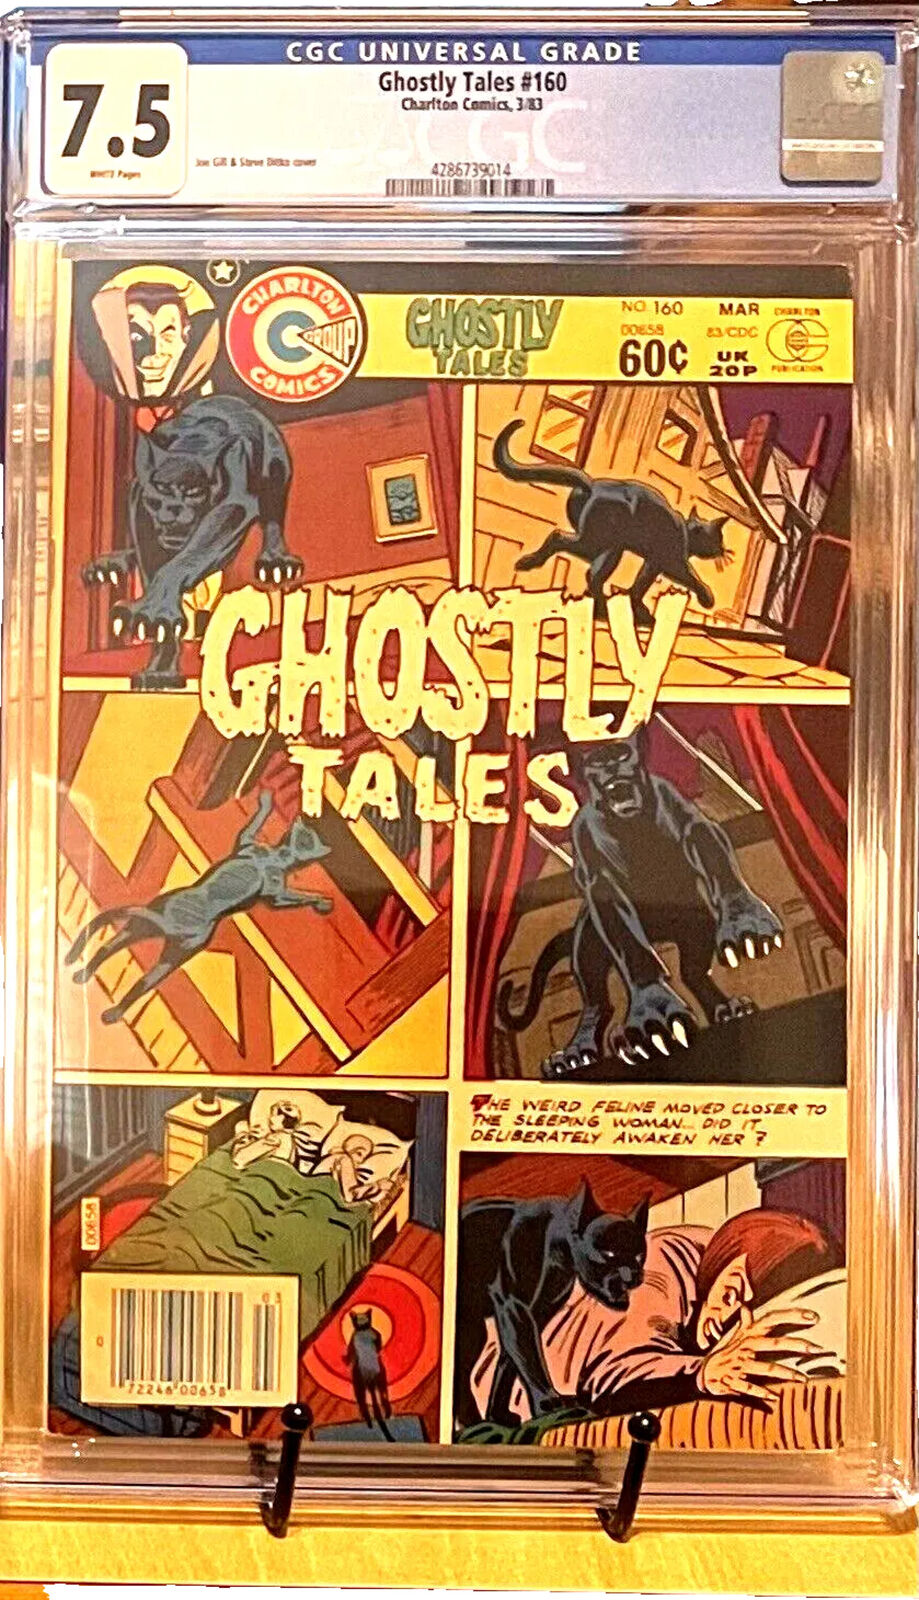 Vintage Ghostly Tales #160 March 1983 Charlton Art By Steve Ditko 7.5 CGC